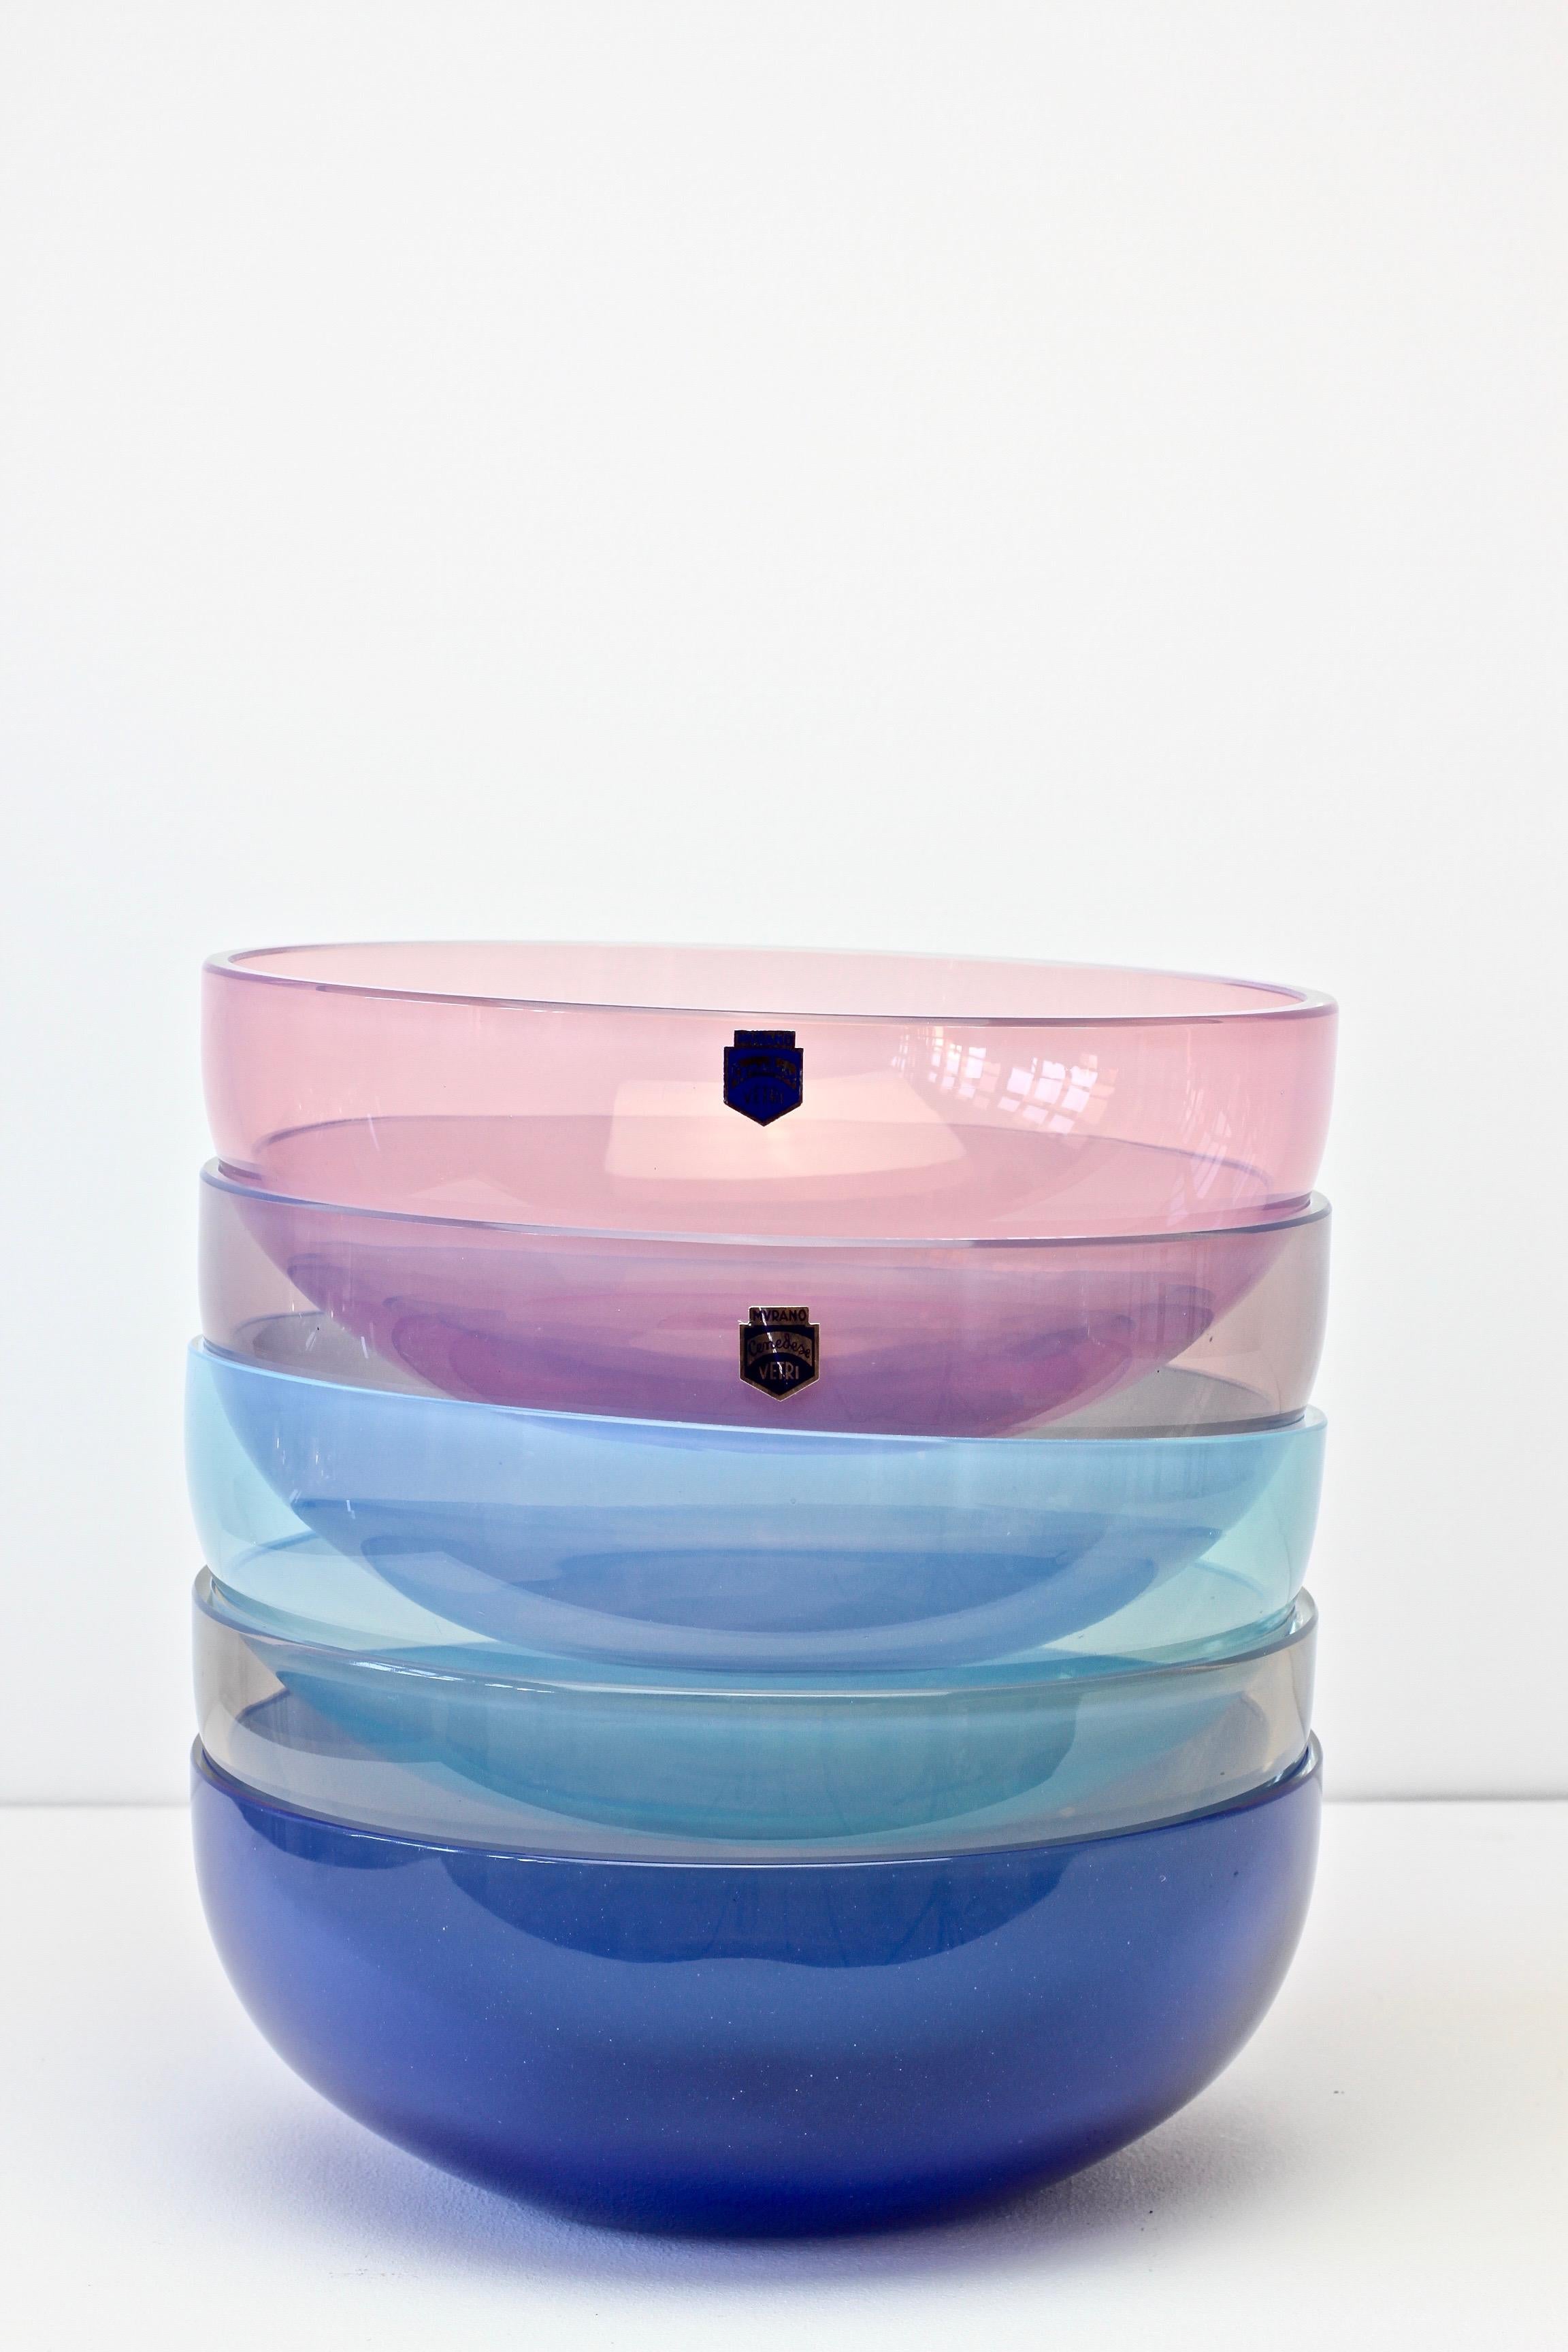 Antonio da Ros for Cenedese Murano Glass Set of Vibrantly Colored Vessels For Sale 2